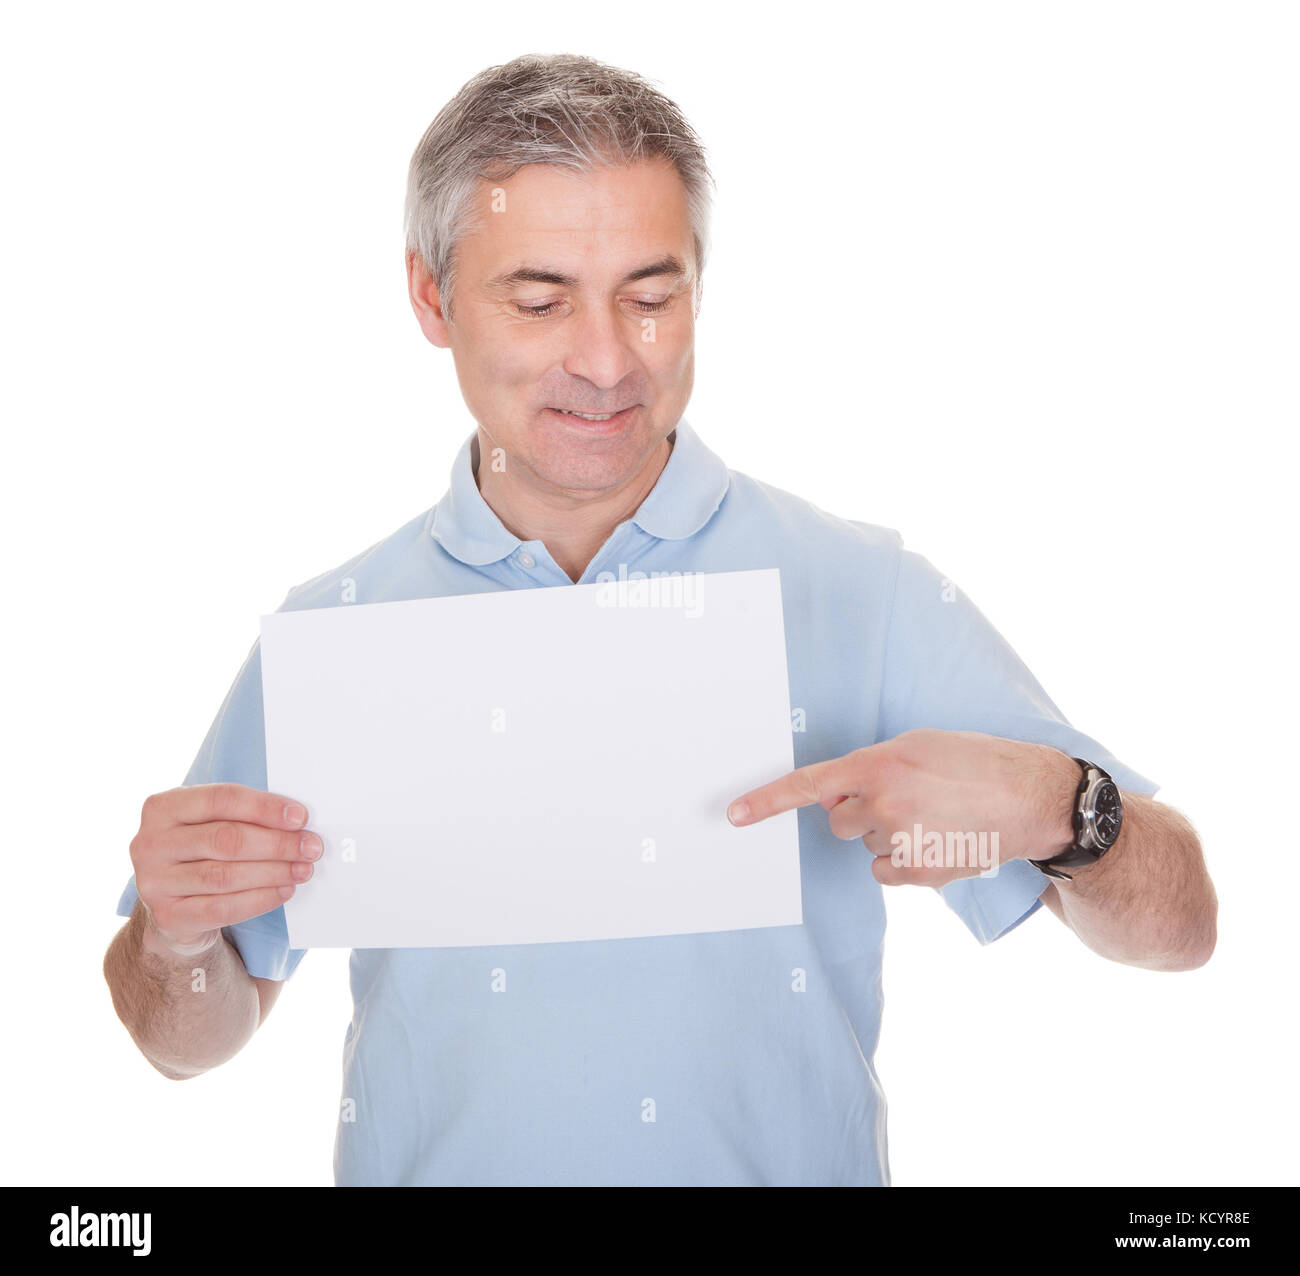 Man Holding Blank Paper Over White Background Stock Photo - Alamy